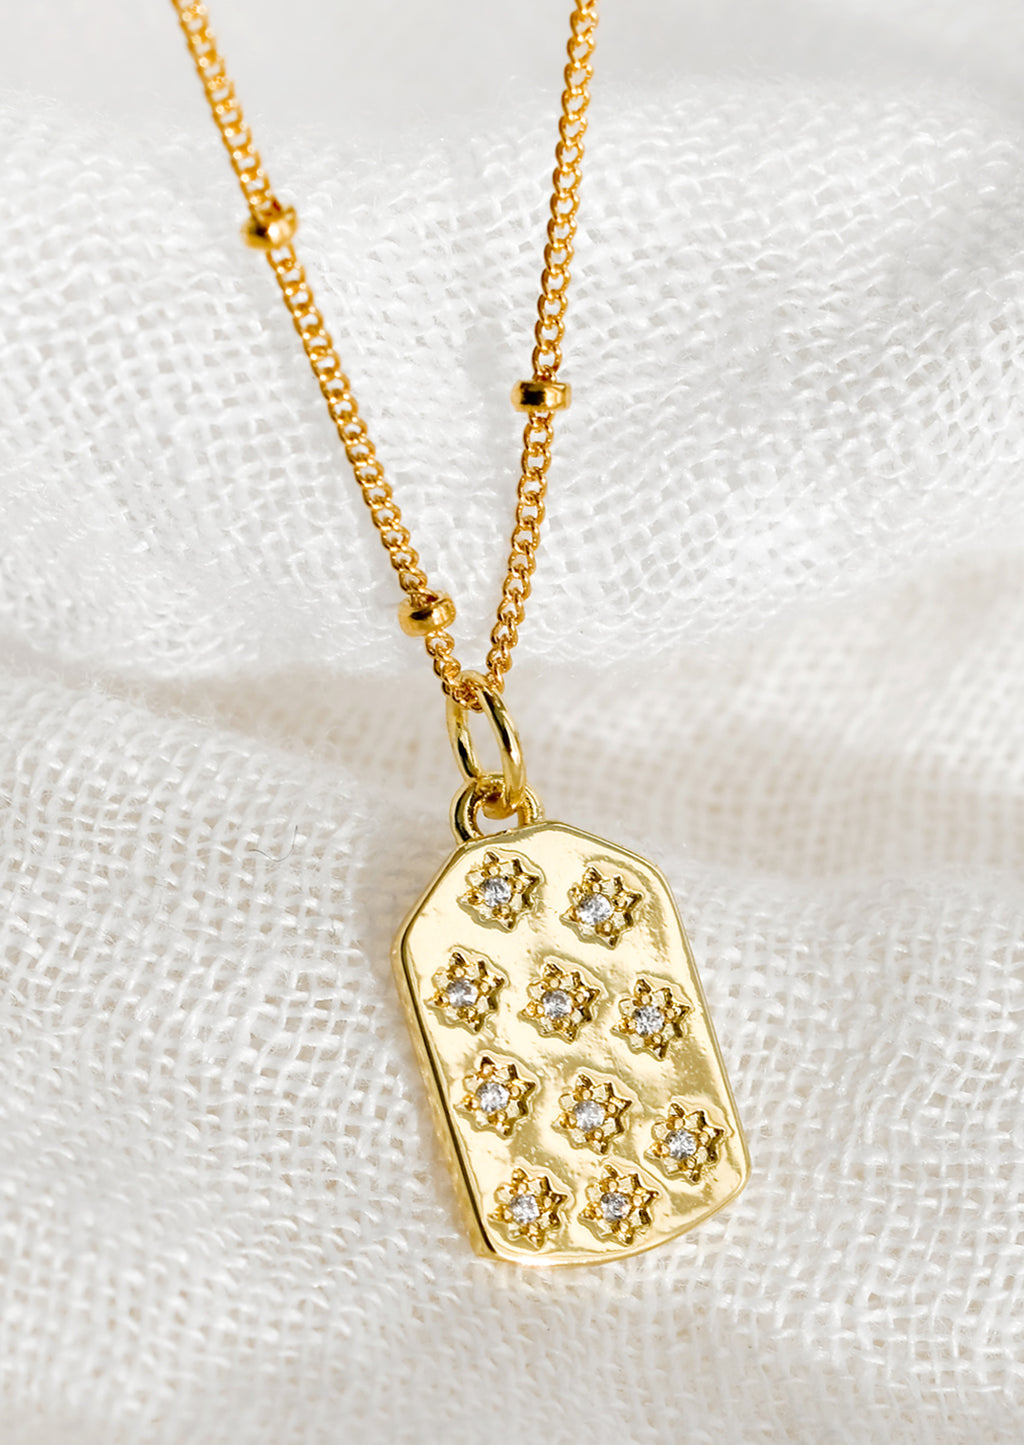 2: A gold tag charm necklace with crystal pave star detailing.